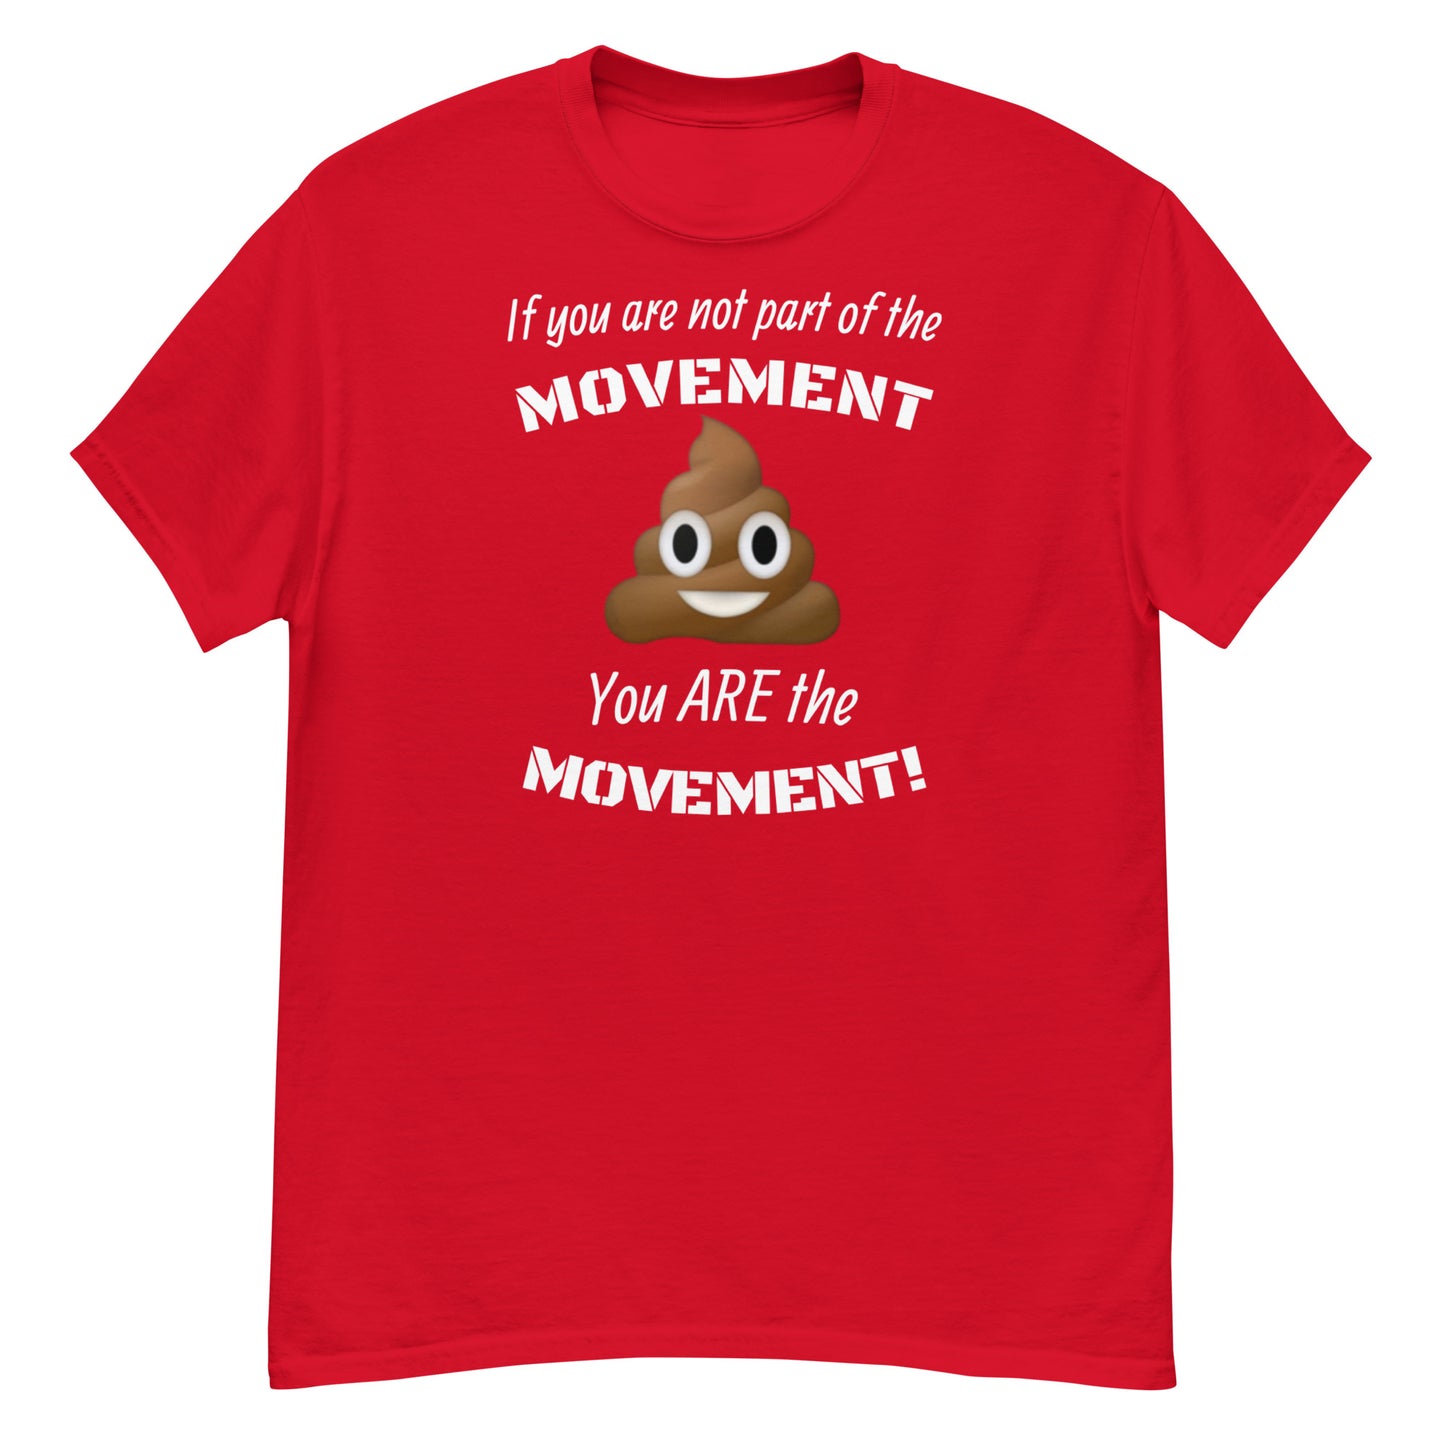 If you are not part of the movement, you ARE the movement - Wake up! classic tee